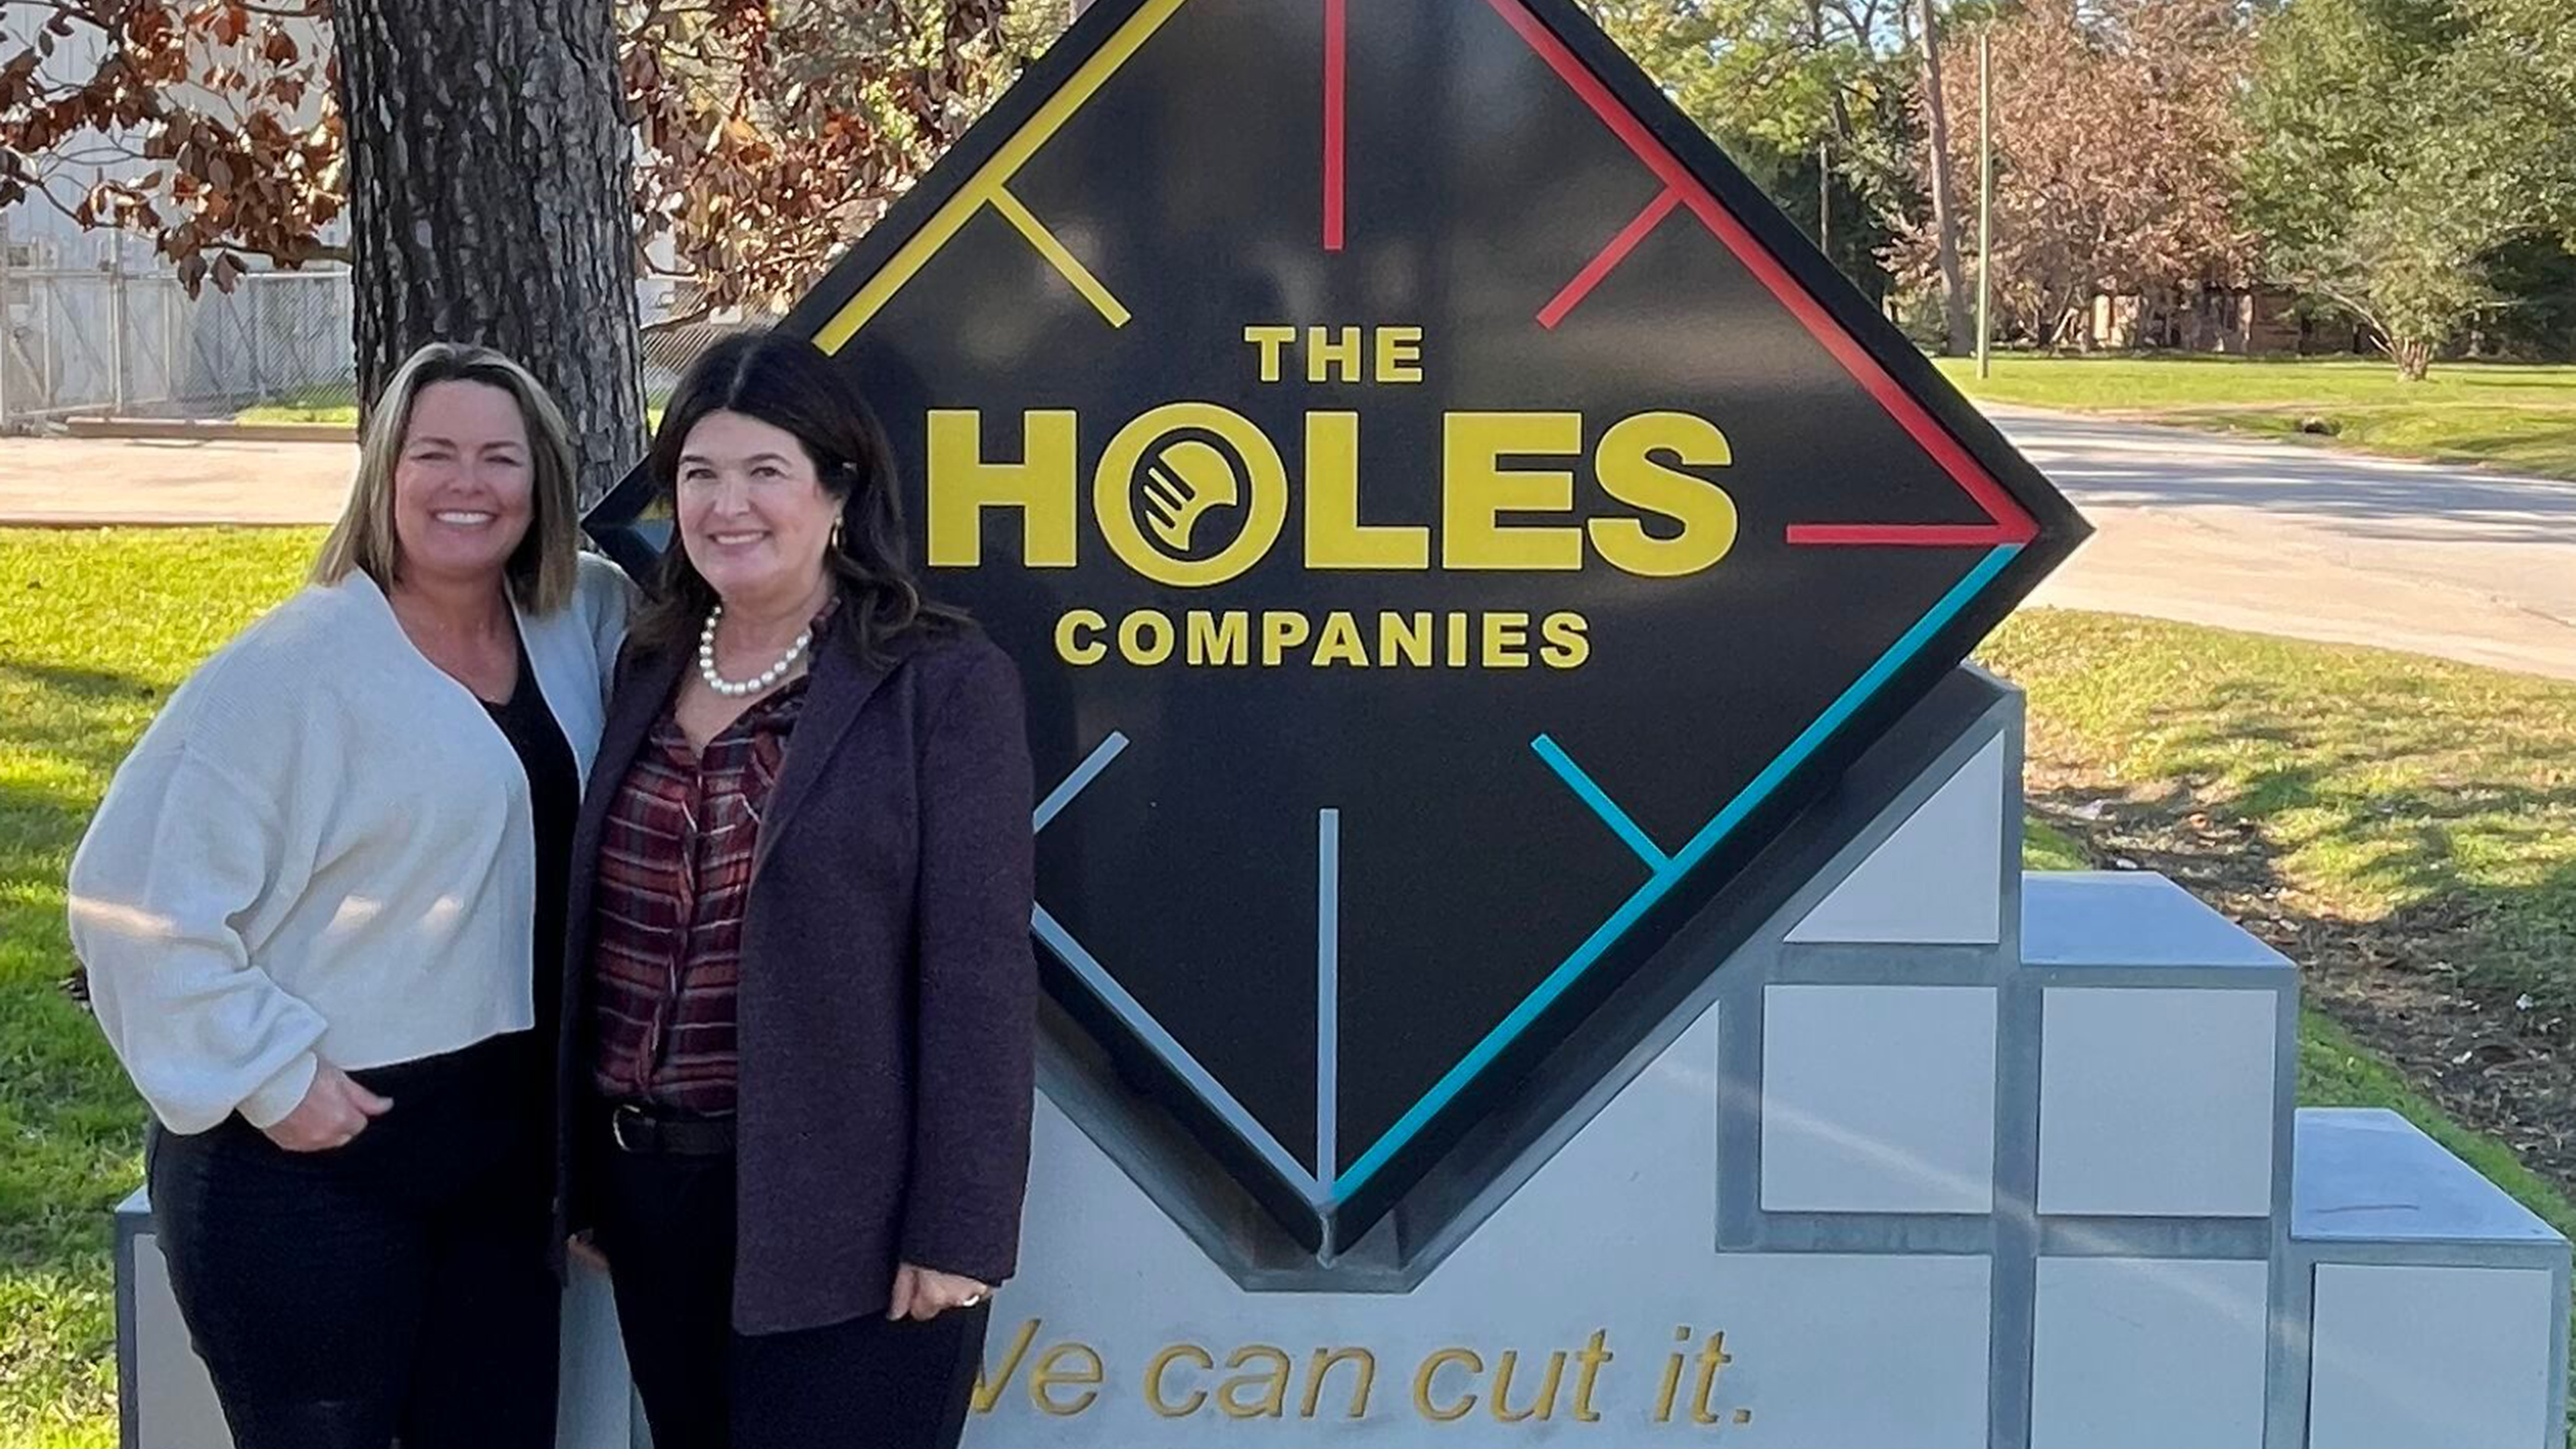 Darlene and Kelly stand in front of a sign that reads The Holes Company